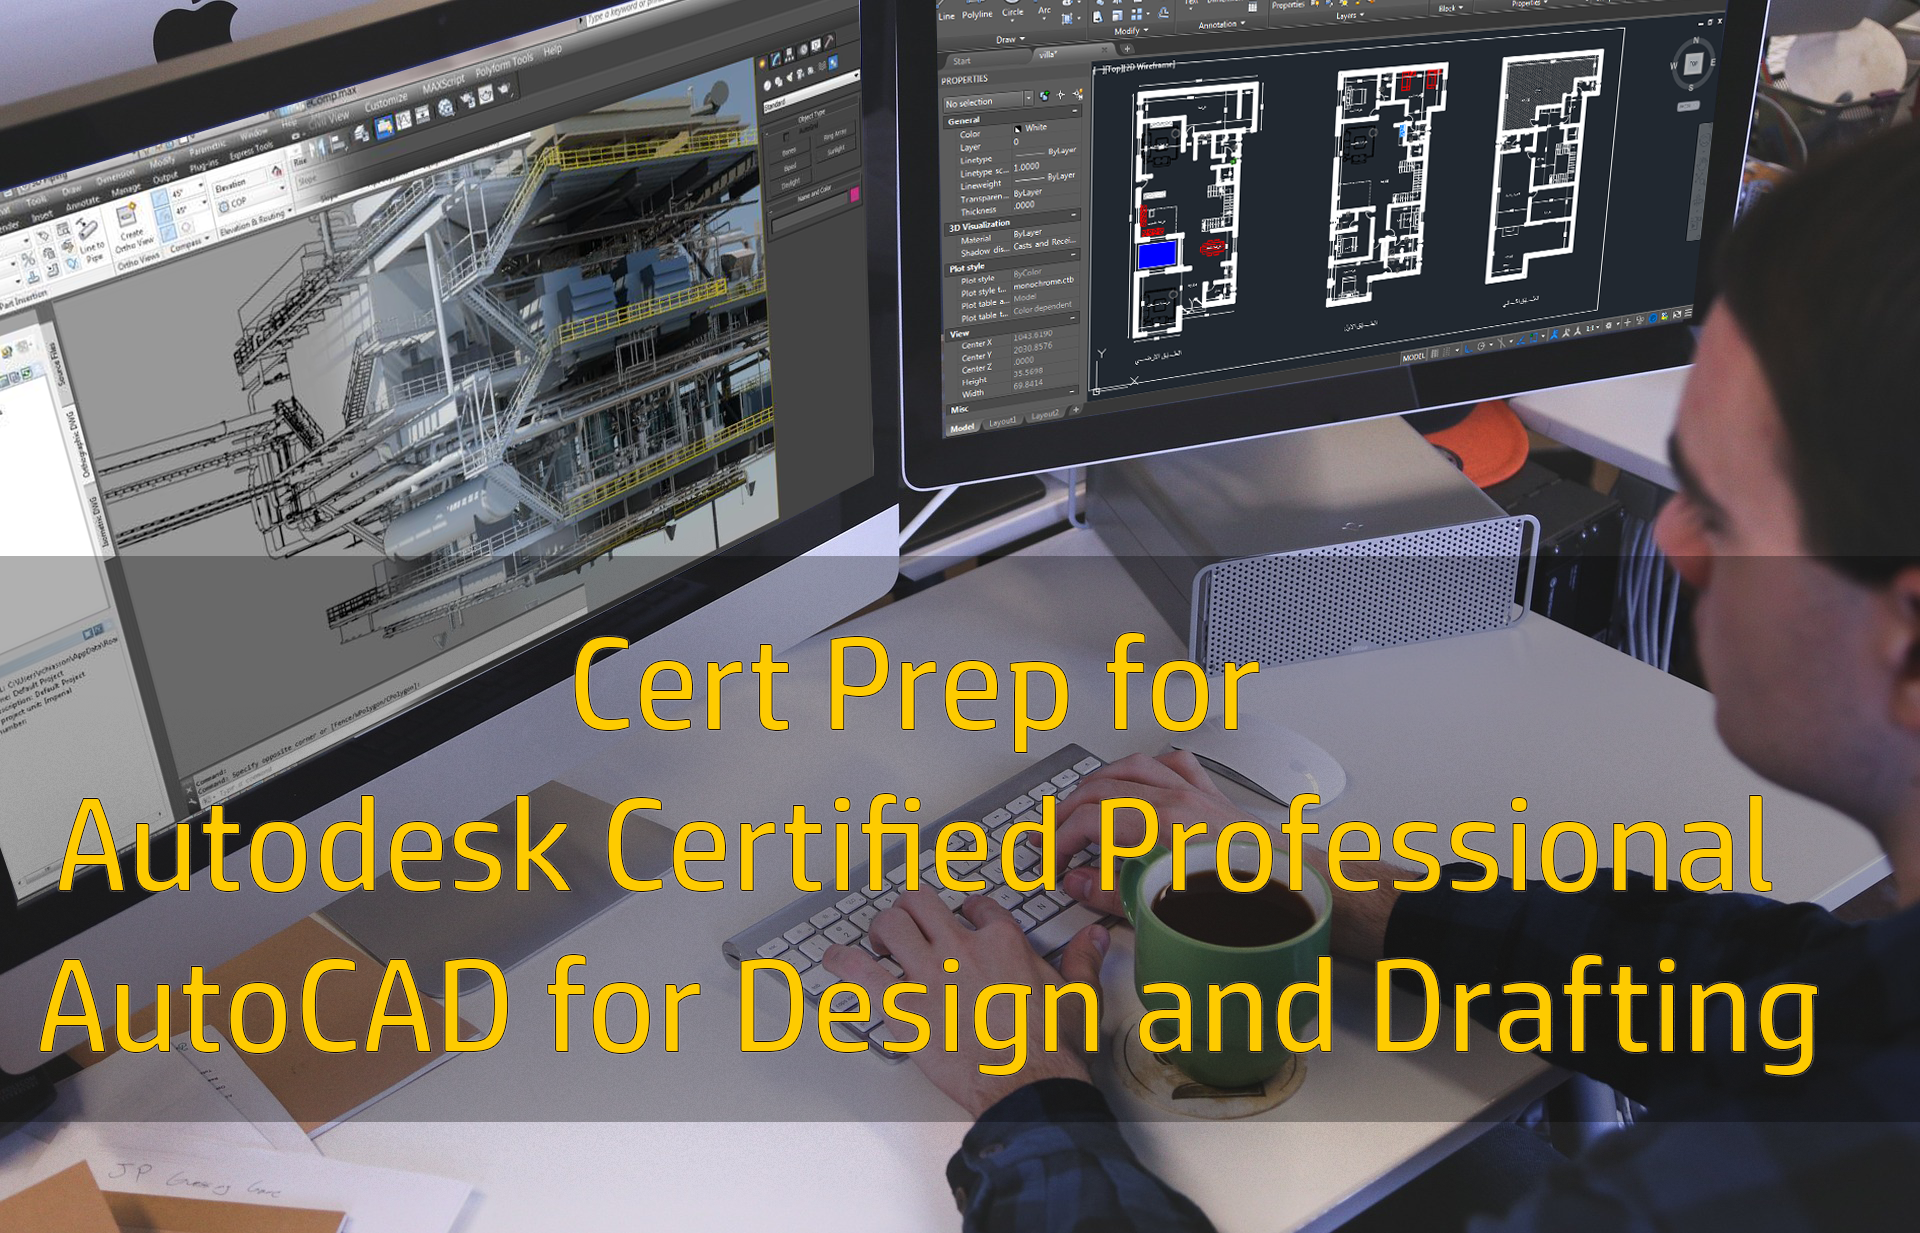 Cert Prep for Autodesk Certified Professional: AutoCAD for Design and Drafting